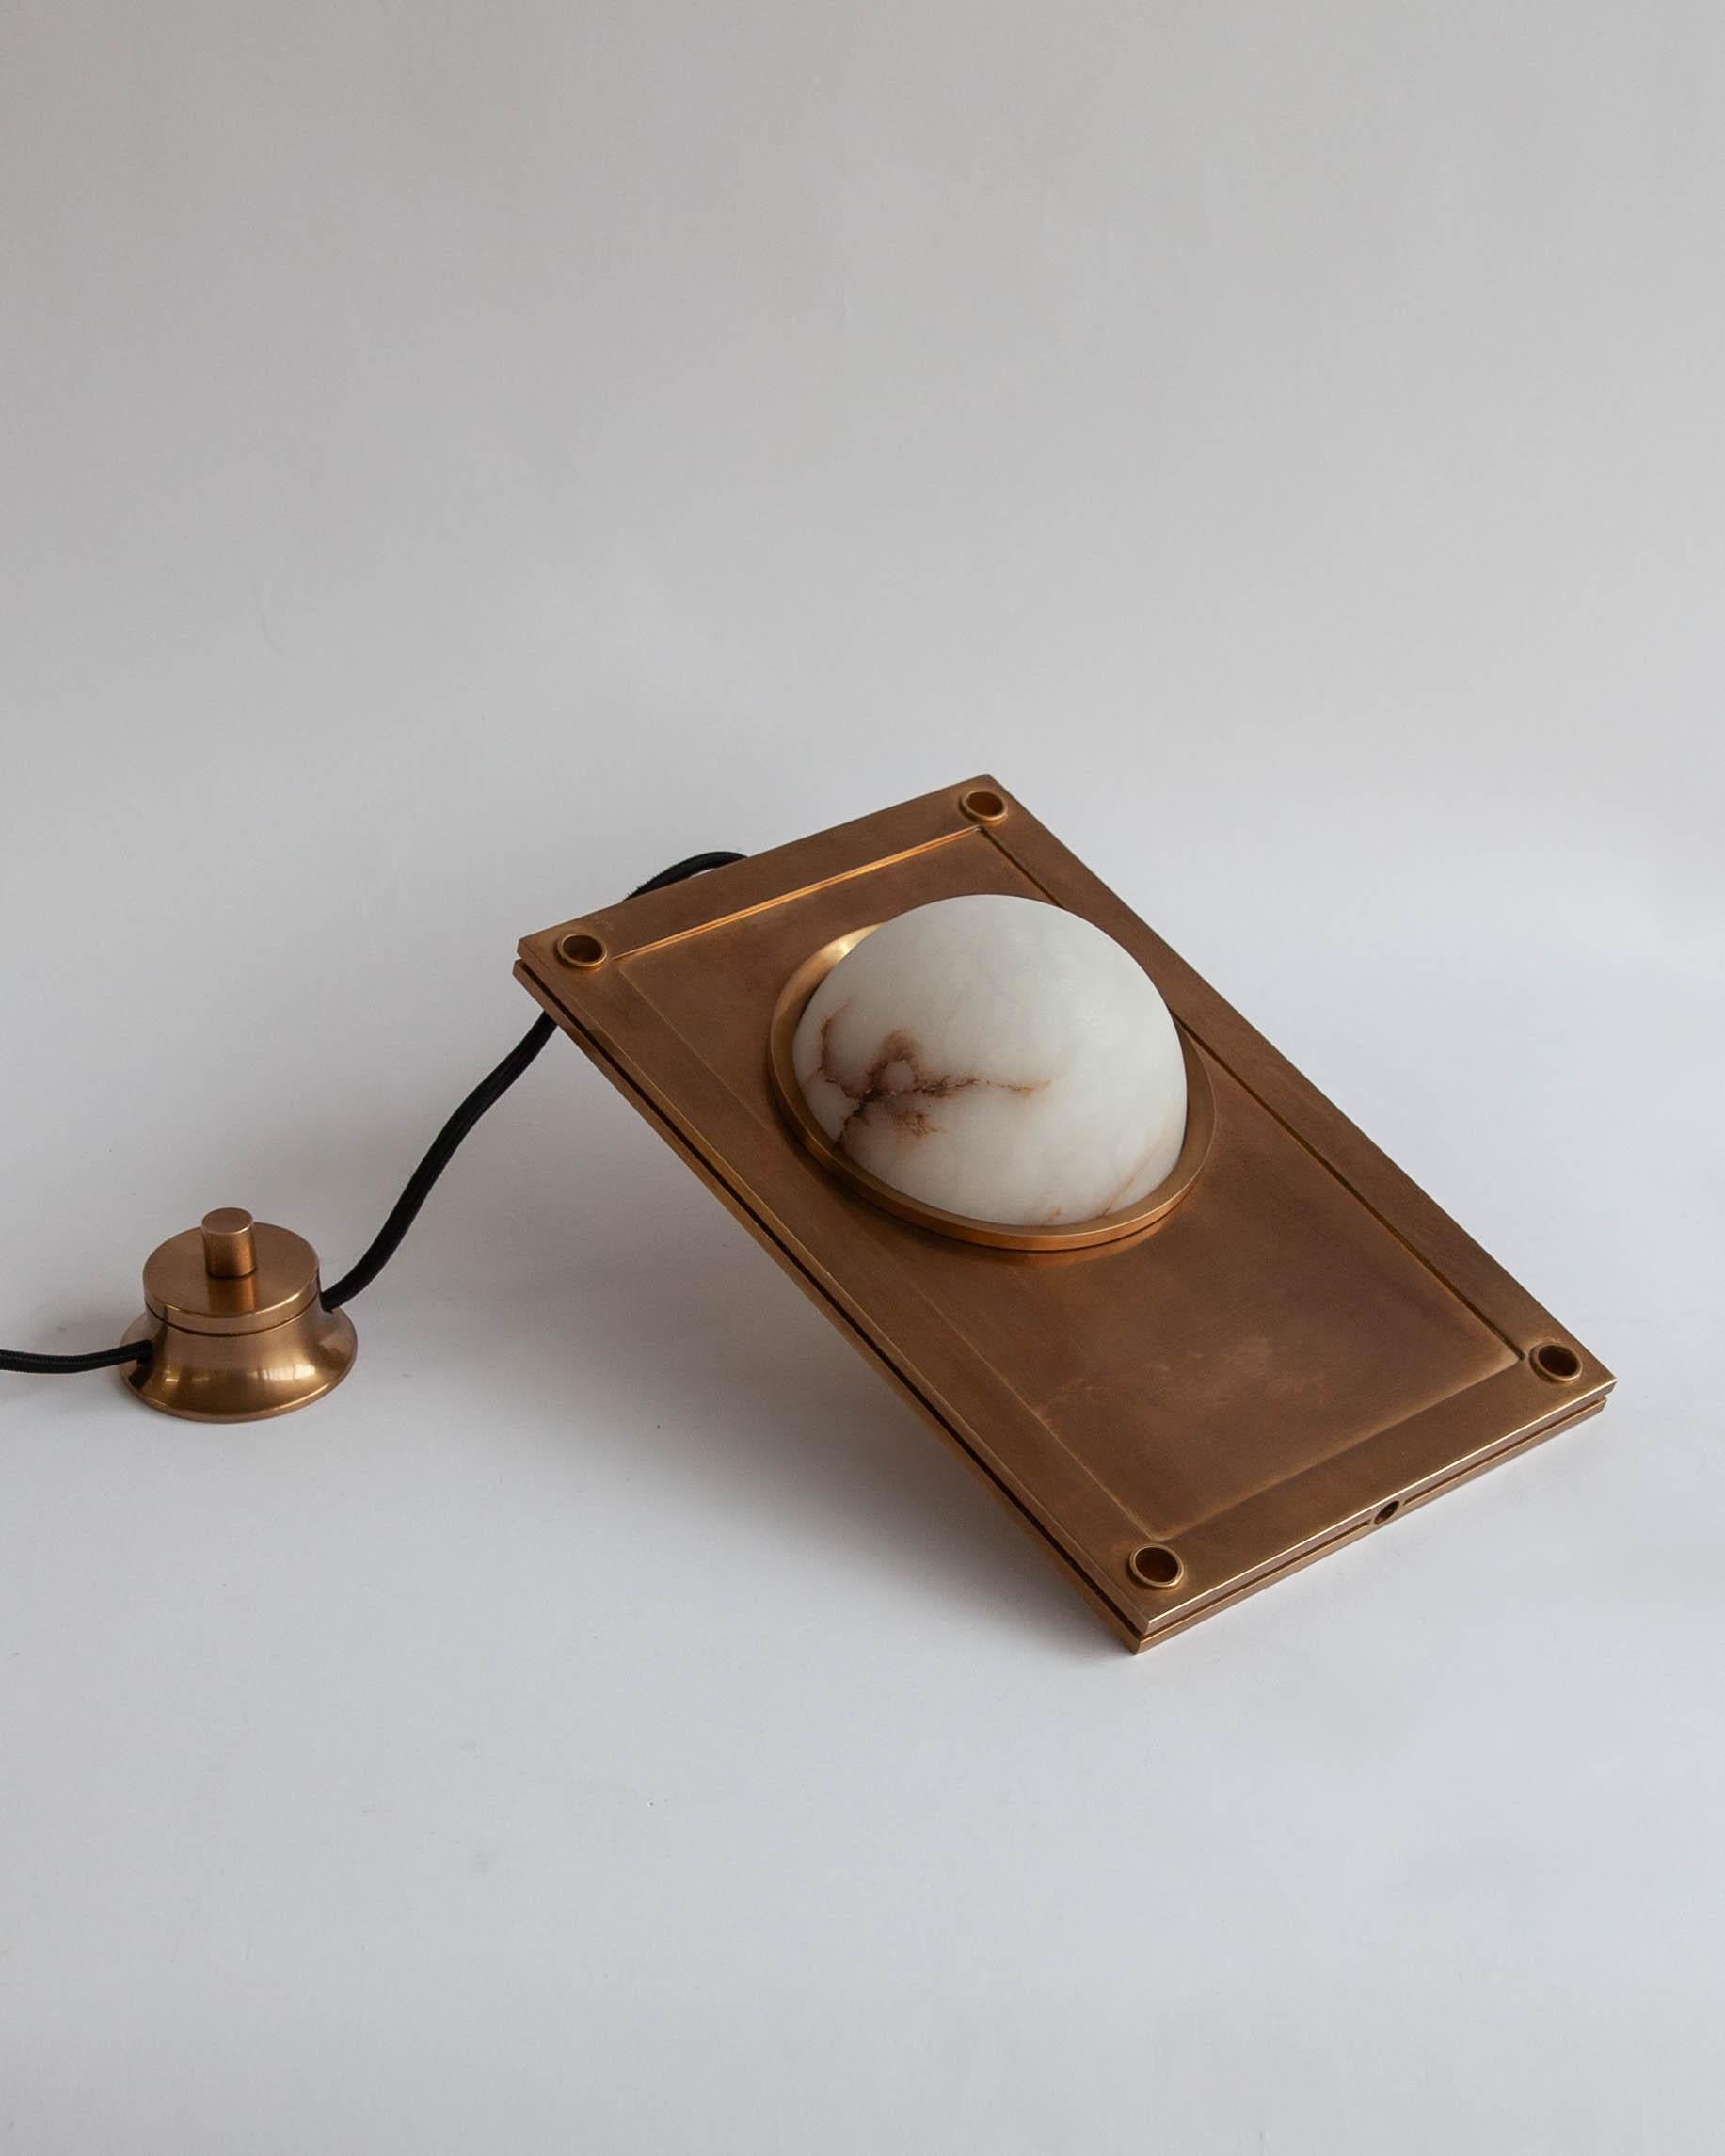 MTL4510 
An illuminated tabletop sculpture made of a hand-carved, veined white alabaster globe lens, set in a solid slab of machined brass with threaded porthole bezels. Fitted with a heavy brass rotary dimming switch and a single E12 LED lamp that